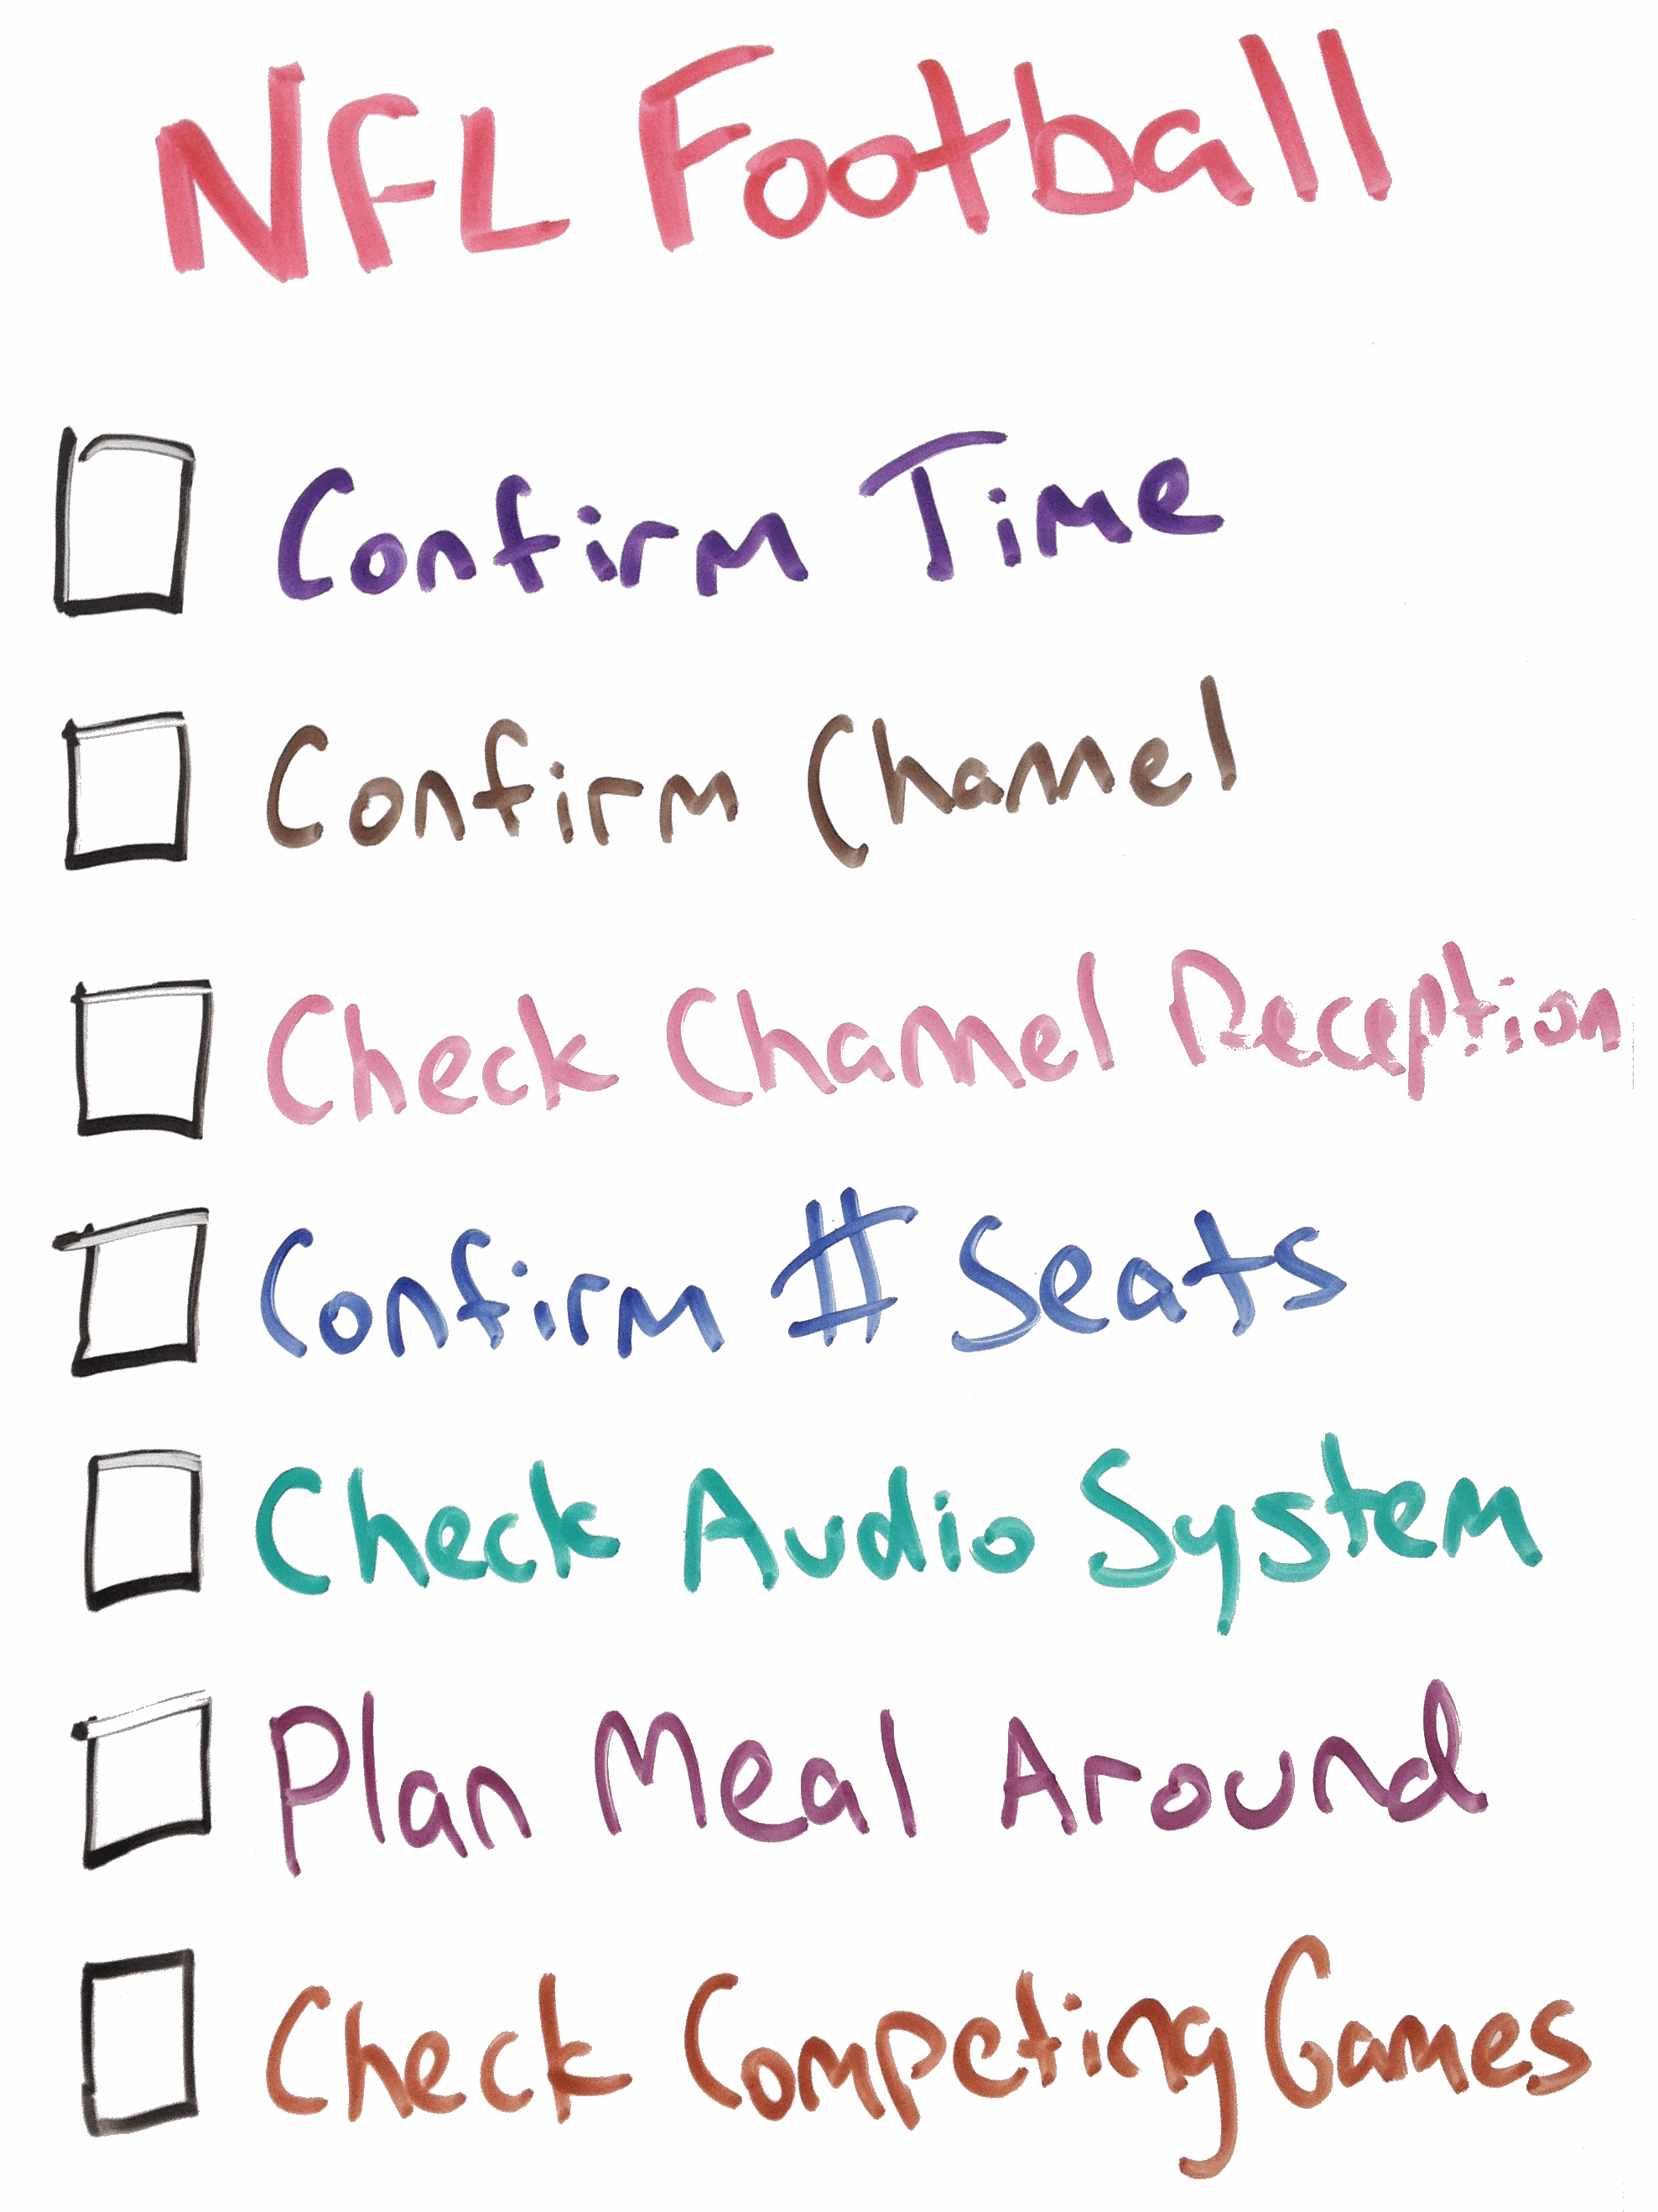 A whiteboard illustration of a checklist depicting a thanksgiving holiday